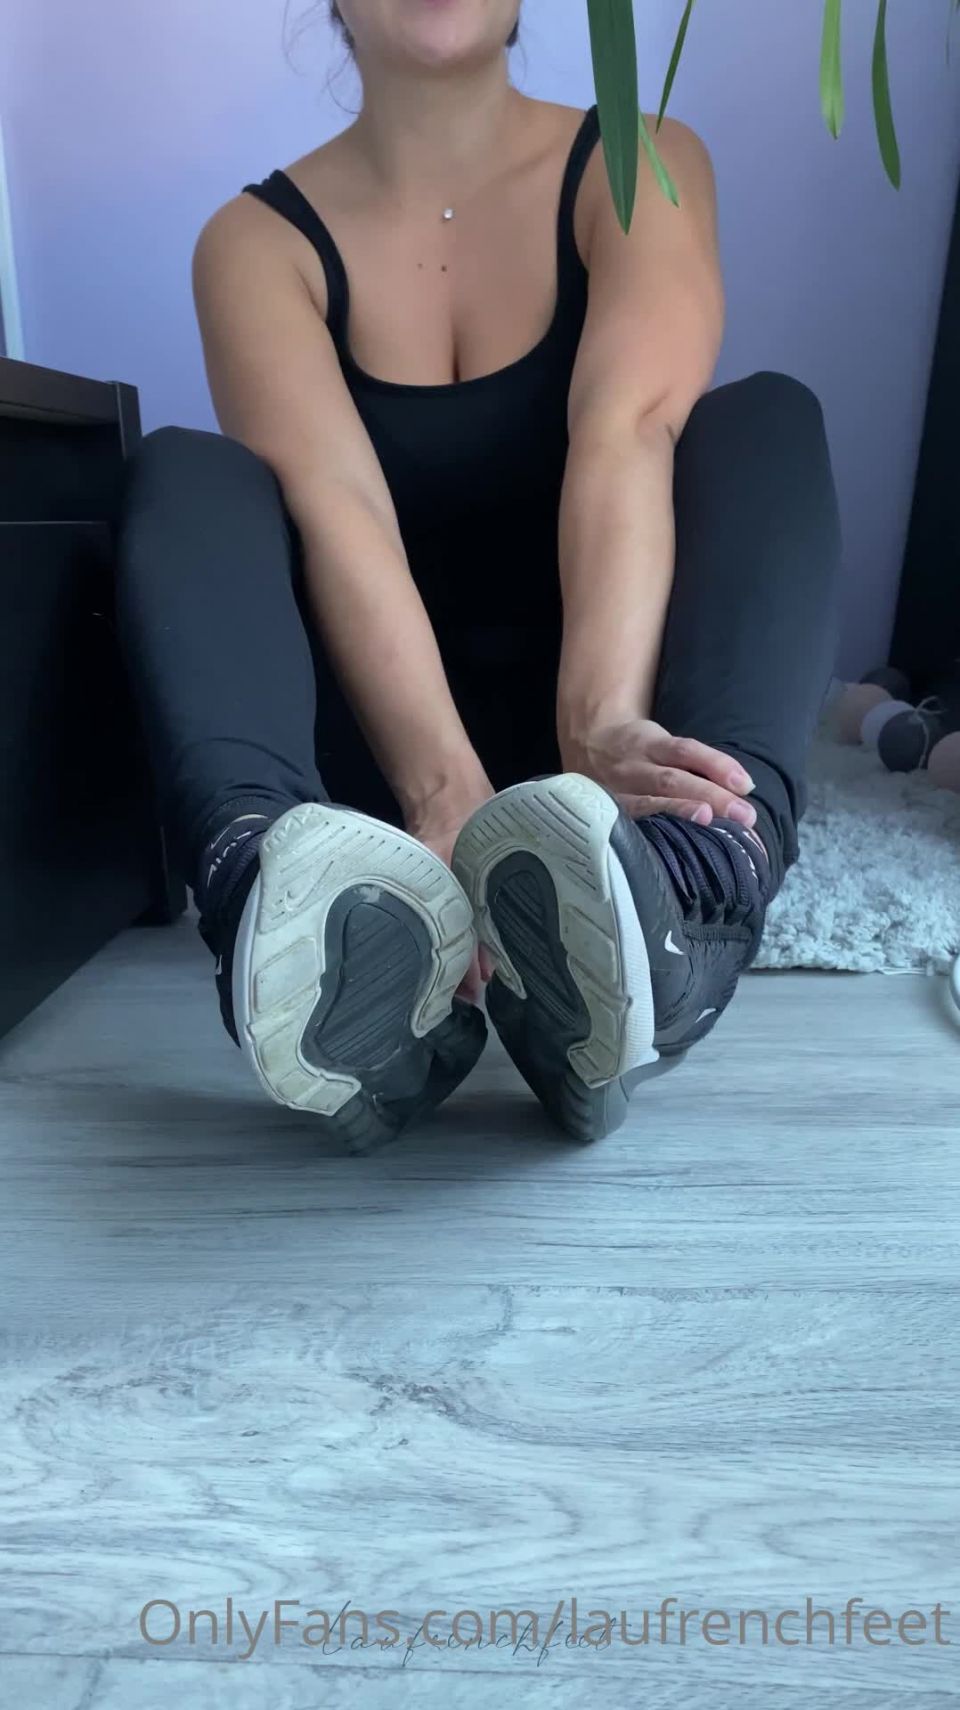 Laufrenchfeet - joi after sport veiny feet 02-09-2021